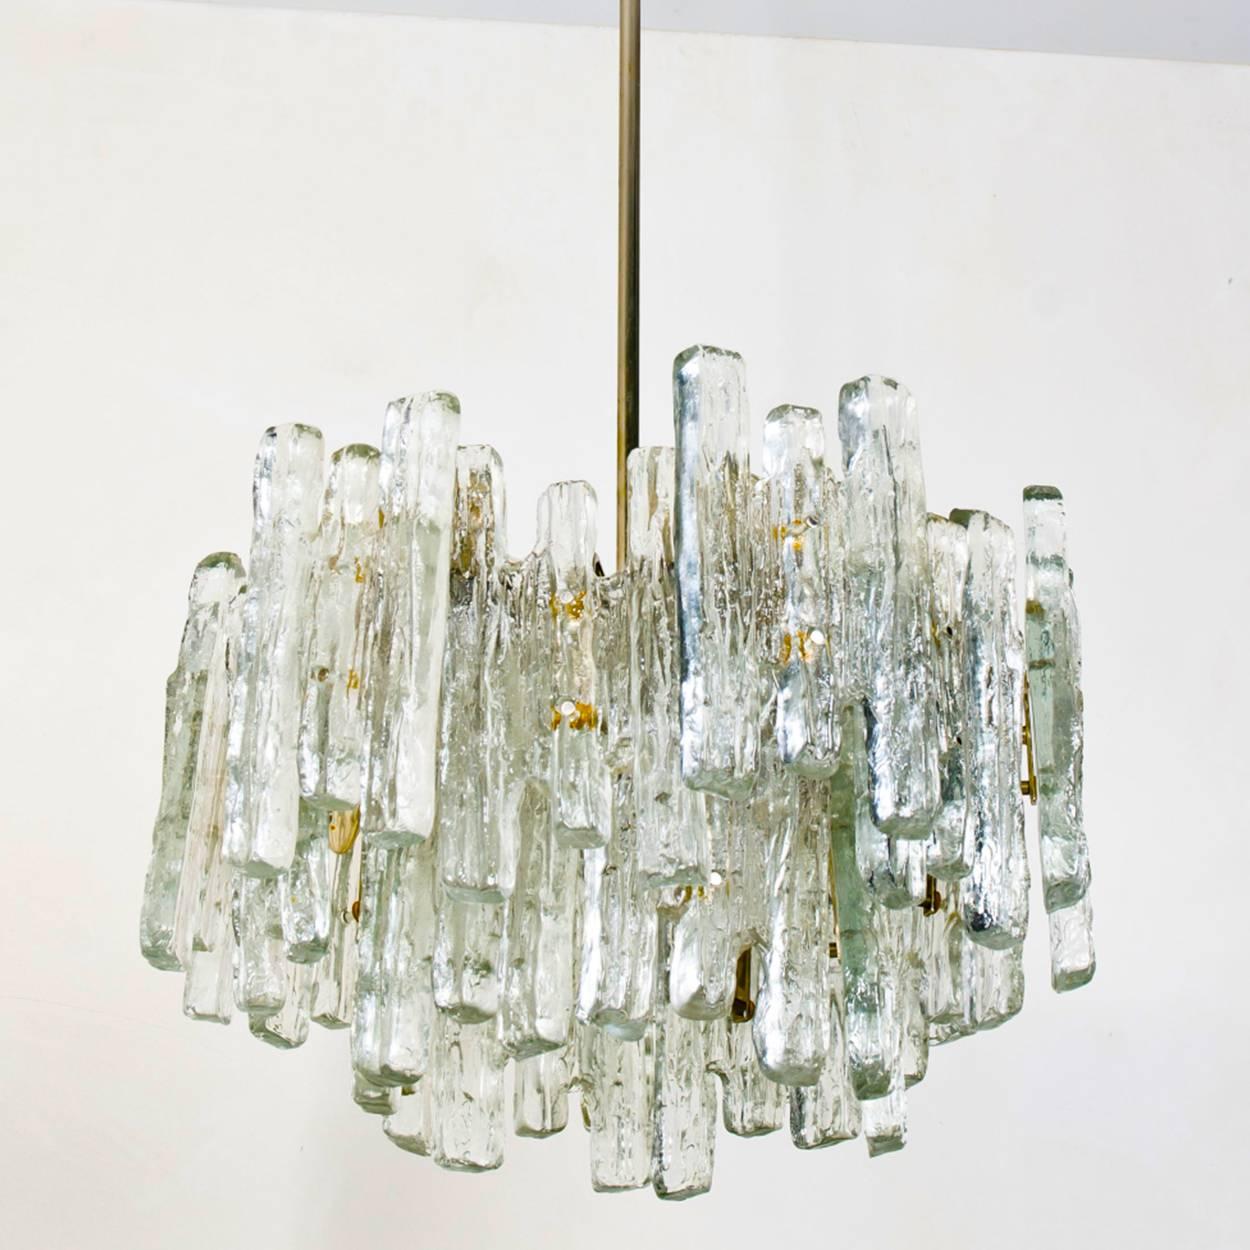 A large and heavy beautiful and elegant modern chandelier, manufactured by Kalmar Austria in the 1960s. Lovely design, the chandelier has 18 sockets 40W and three layers of extremely stylish textured solid ice glass sheets dangling on it. This